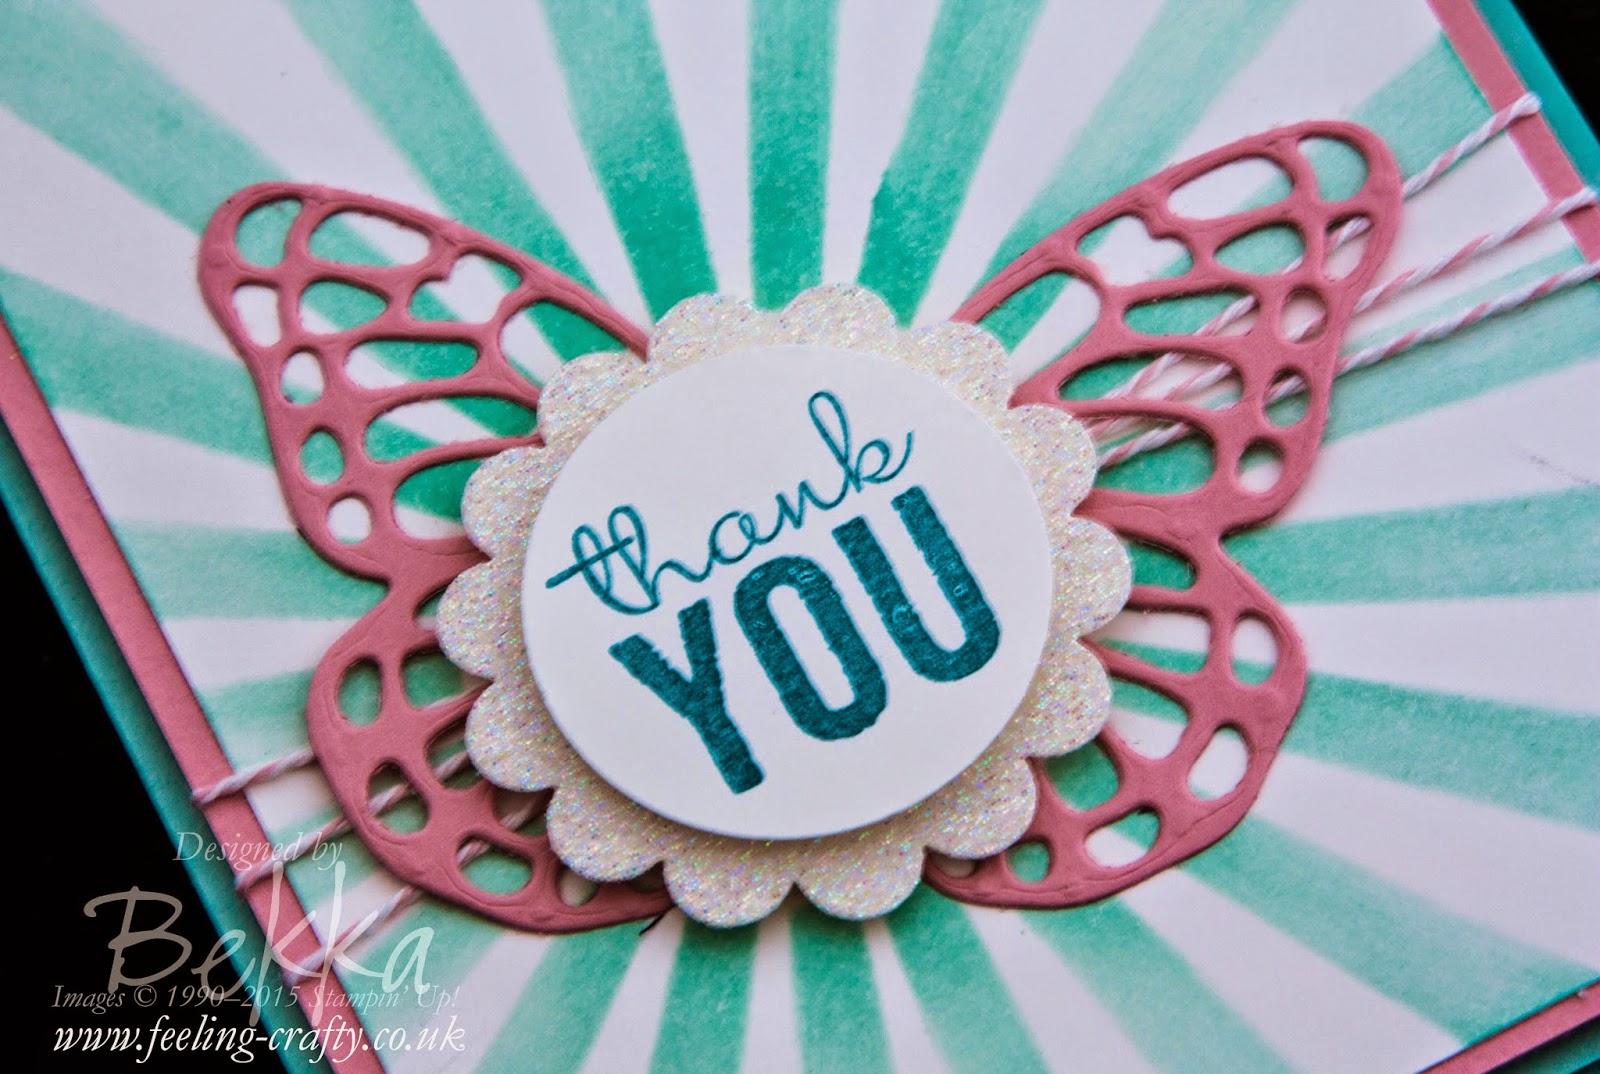 Star Burst Thank You Card featuring Painted Petals from Stampin' Up! UK